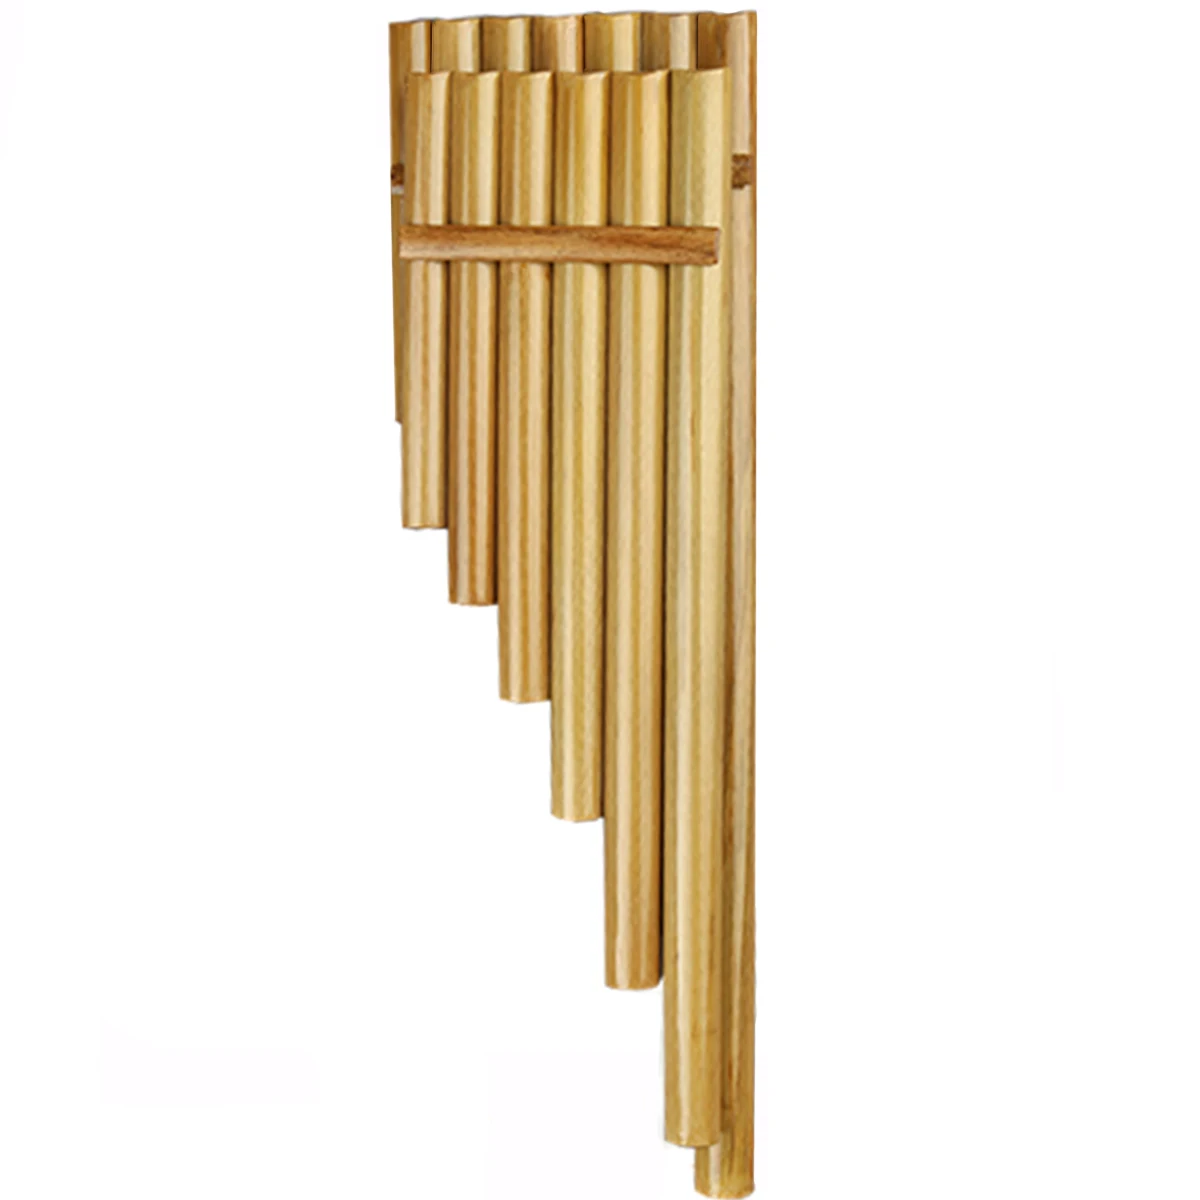 13 Pipes Southern Amercian Right Hand Pan Flute Musical Instruments Original Colour Flute De Pan Woodwind Instruments  Pan Pipes enlarge